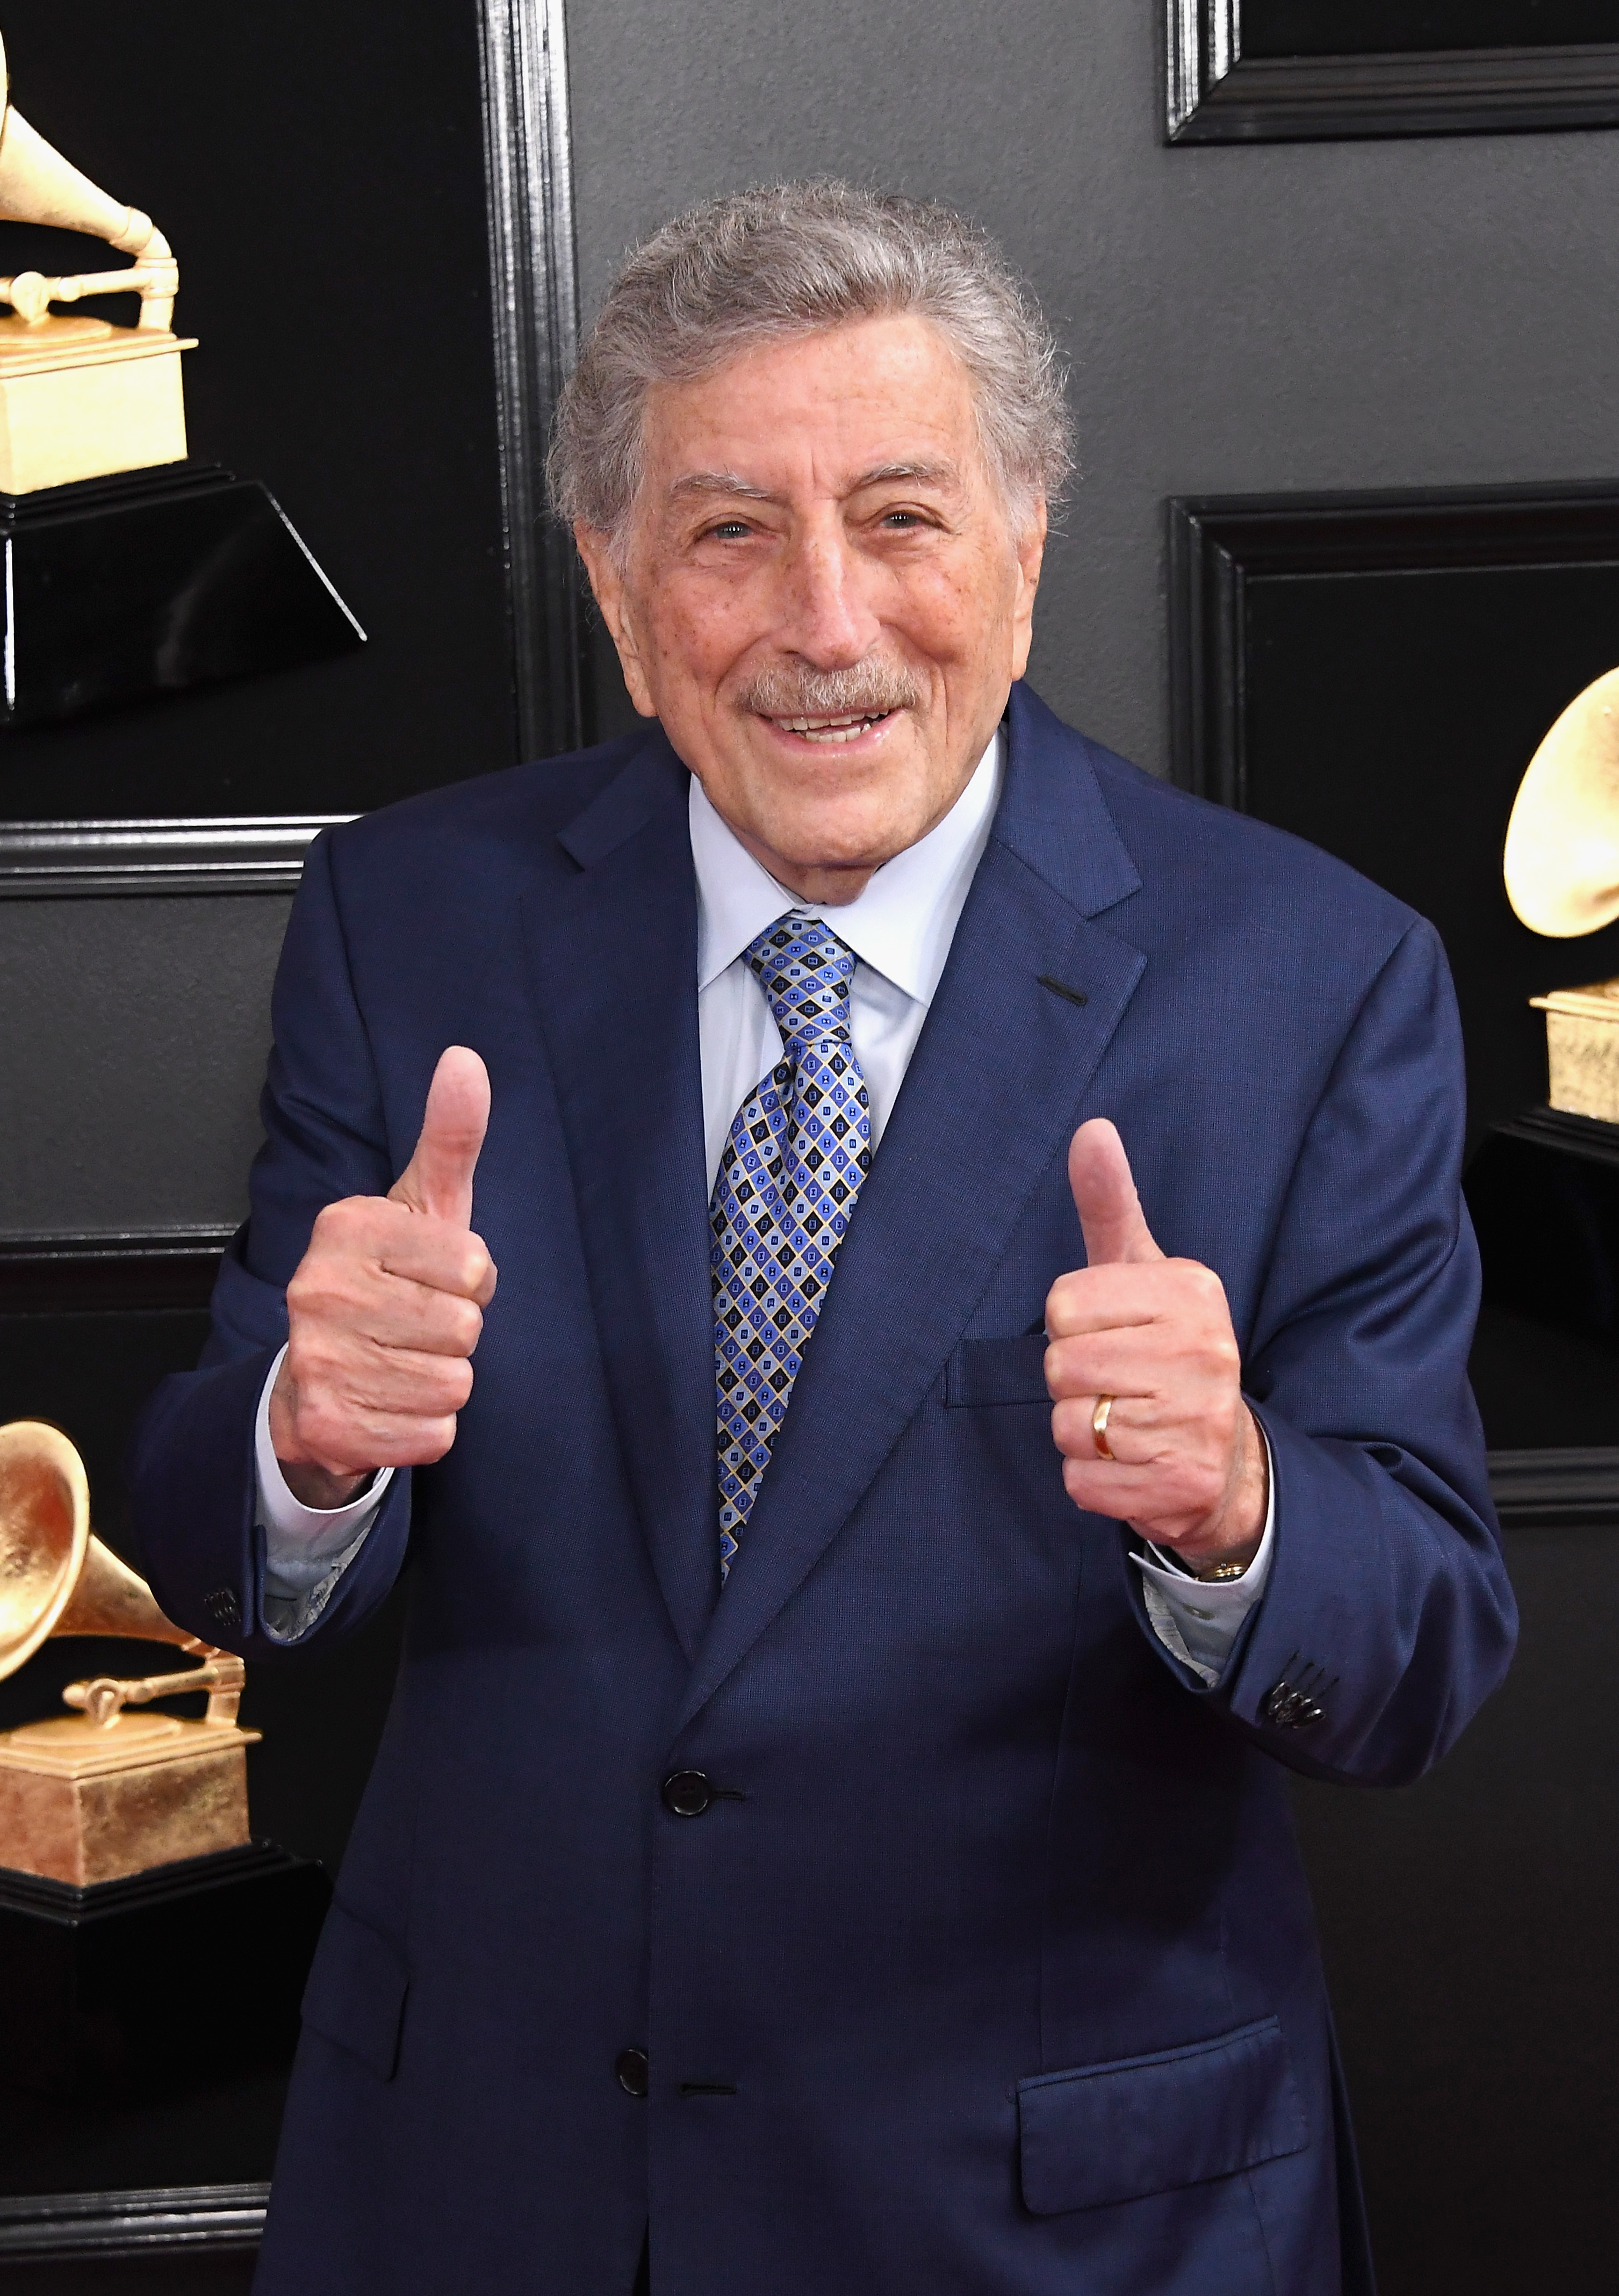 Tony giving two thumbs-up at the Grammys